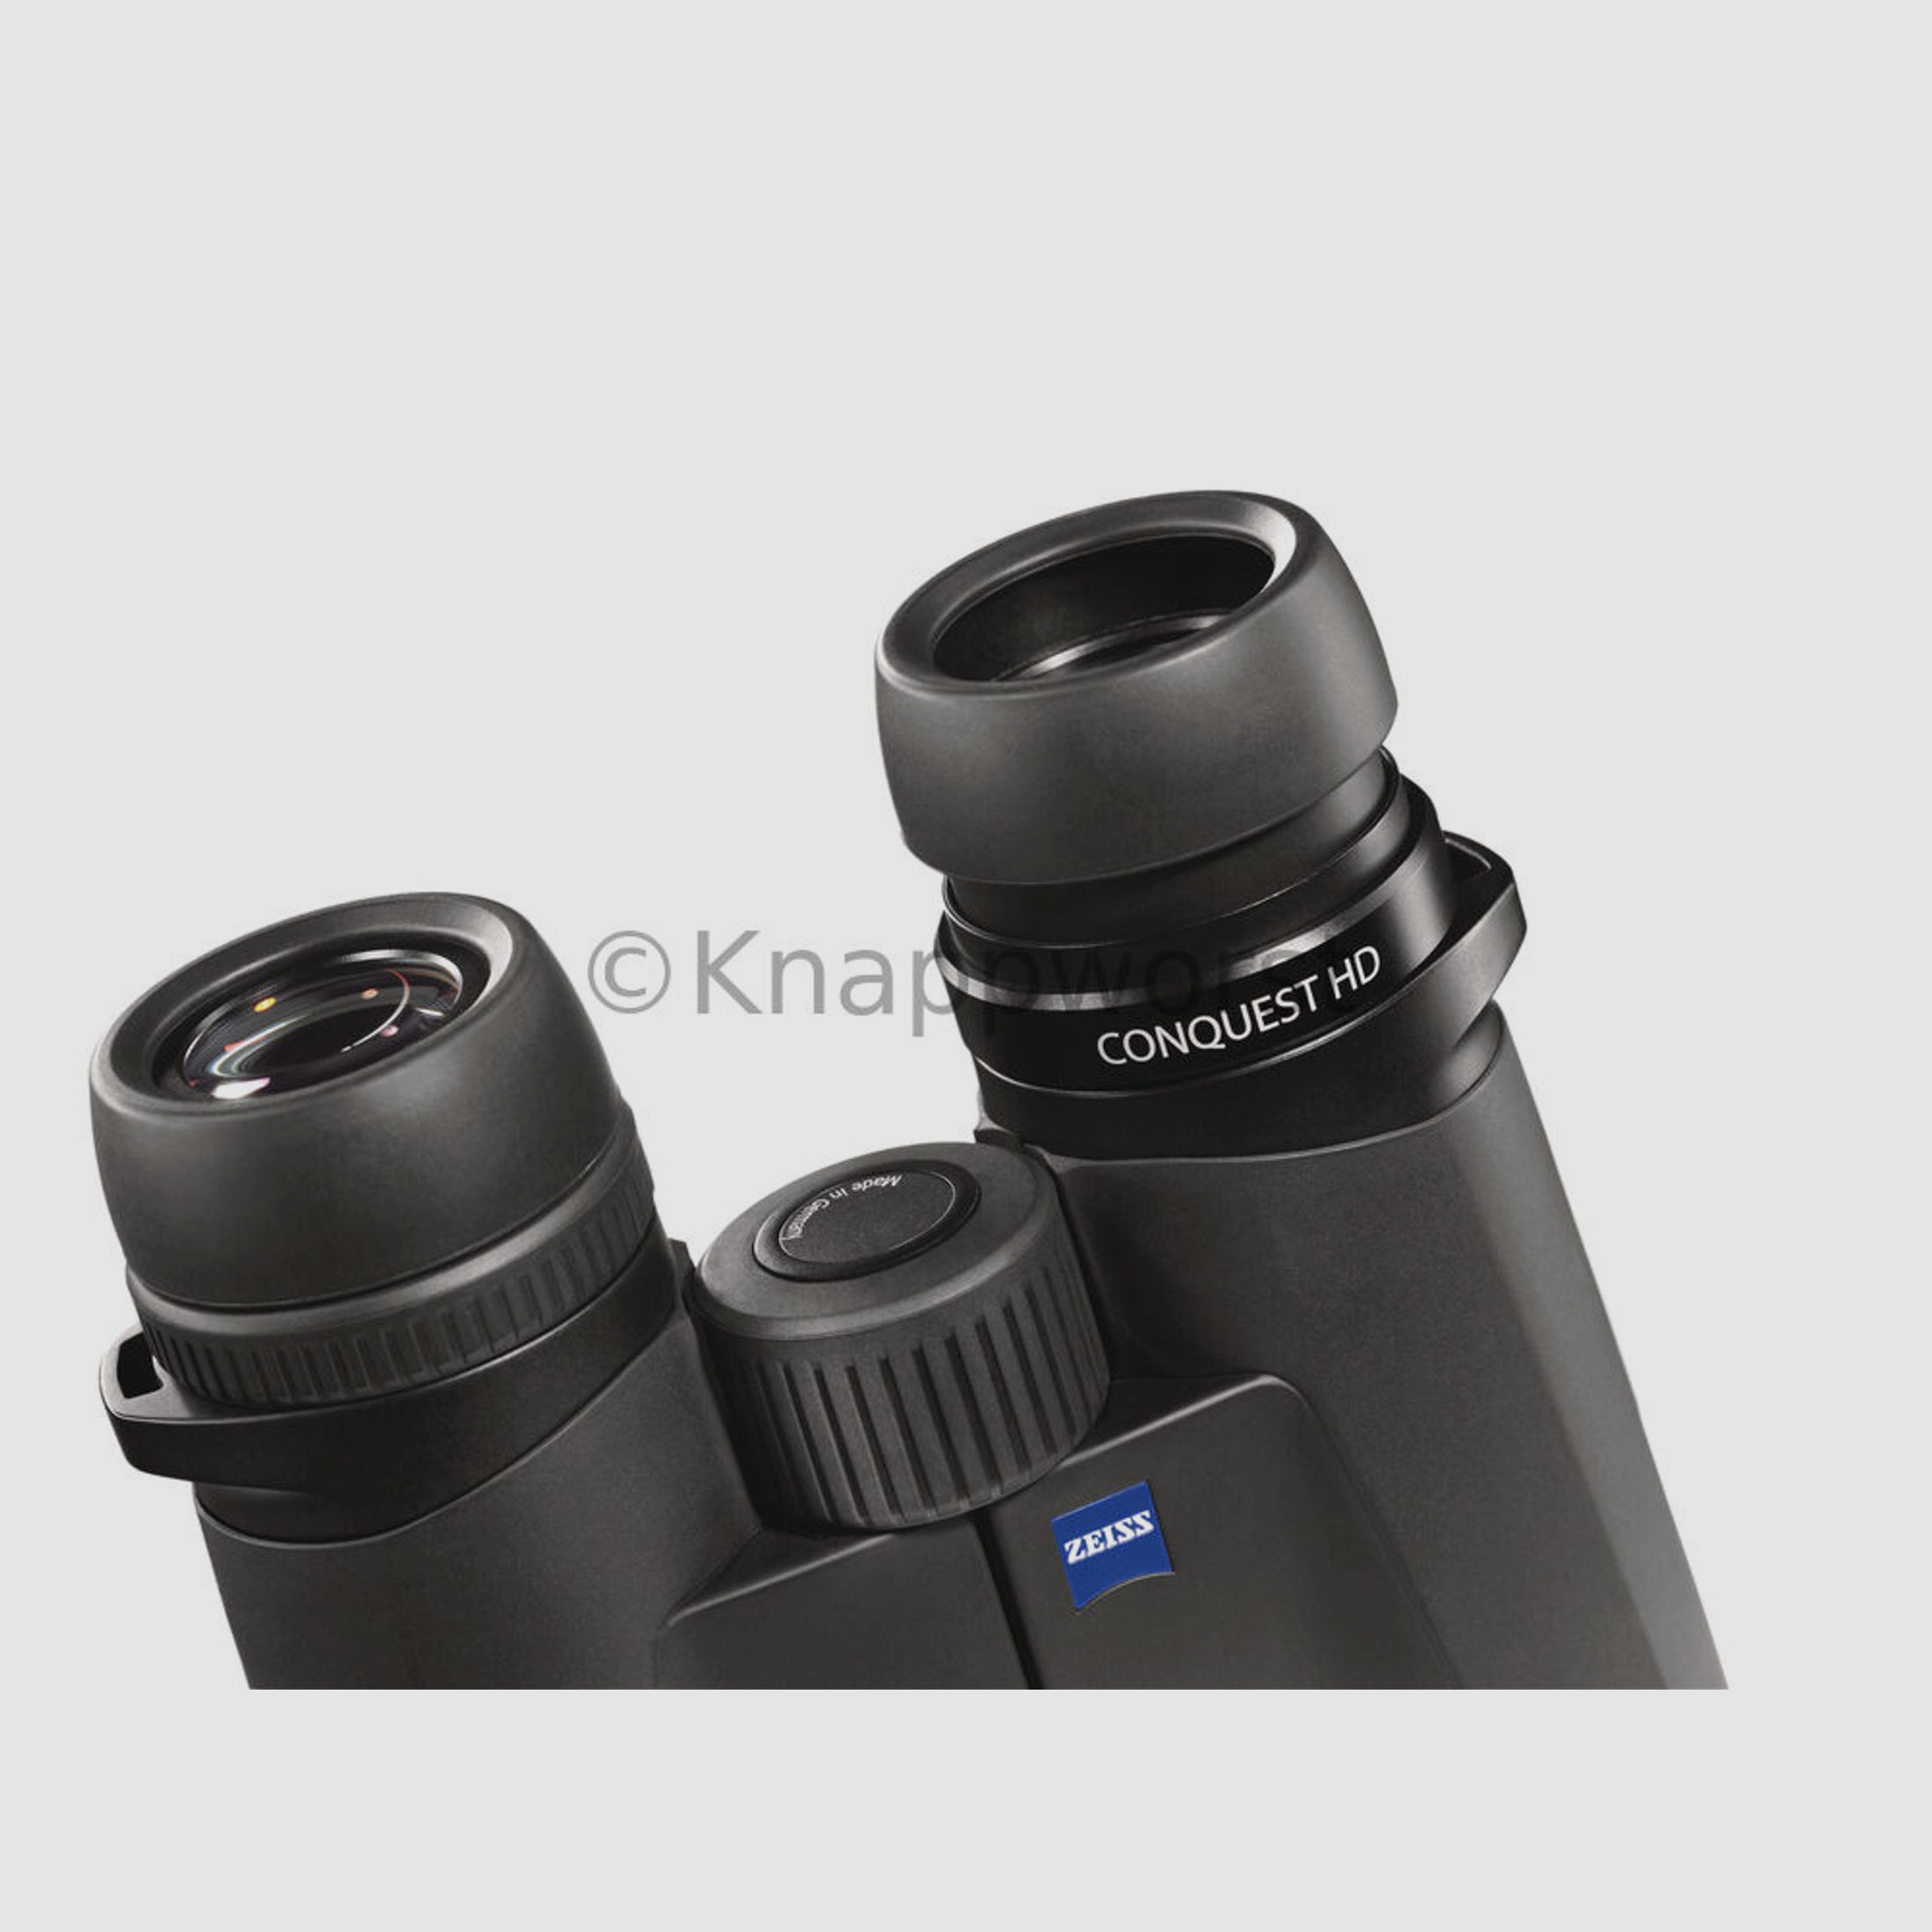 Zeiss	 Conquest HD 8x42